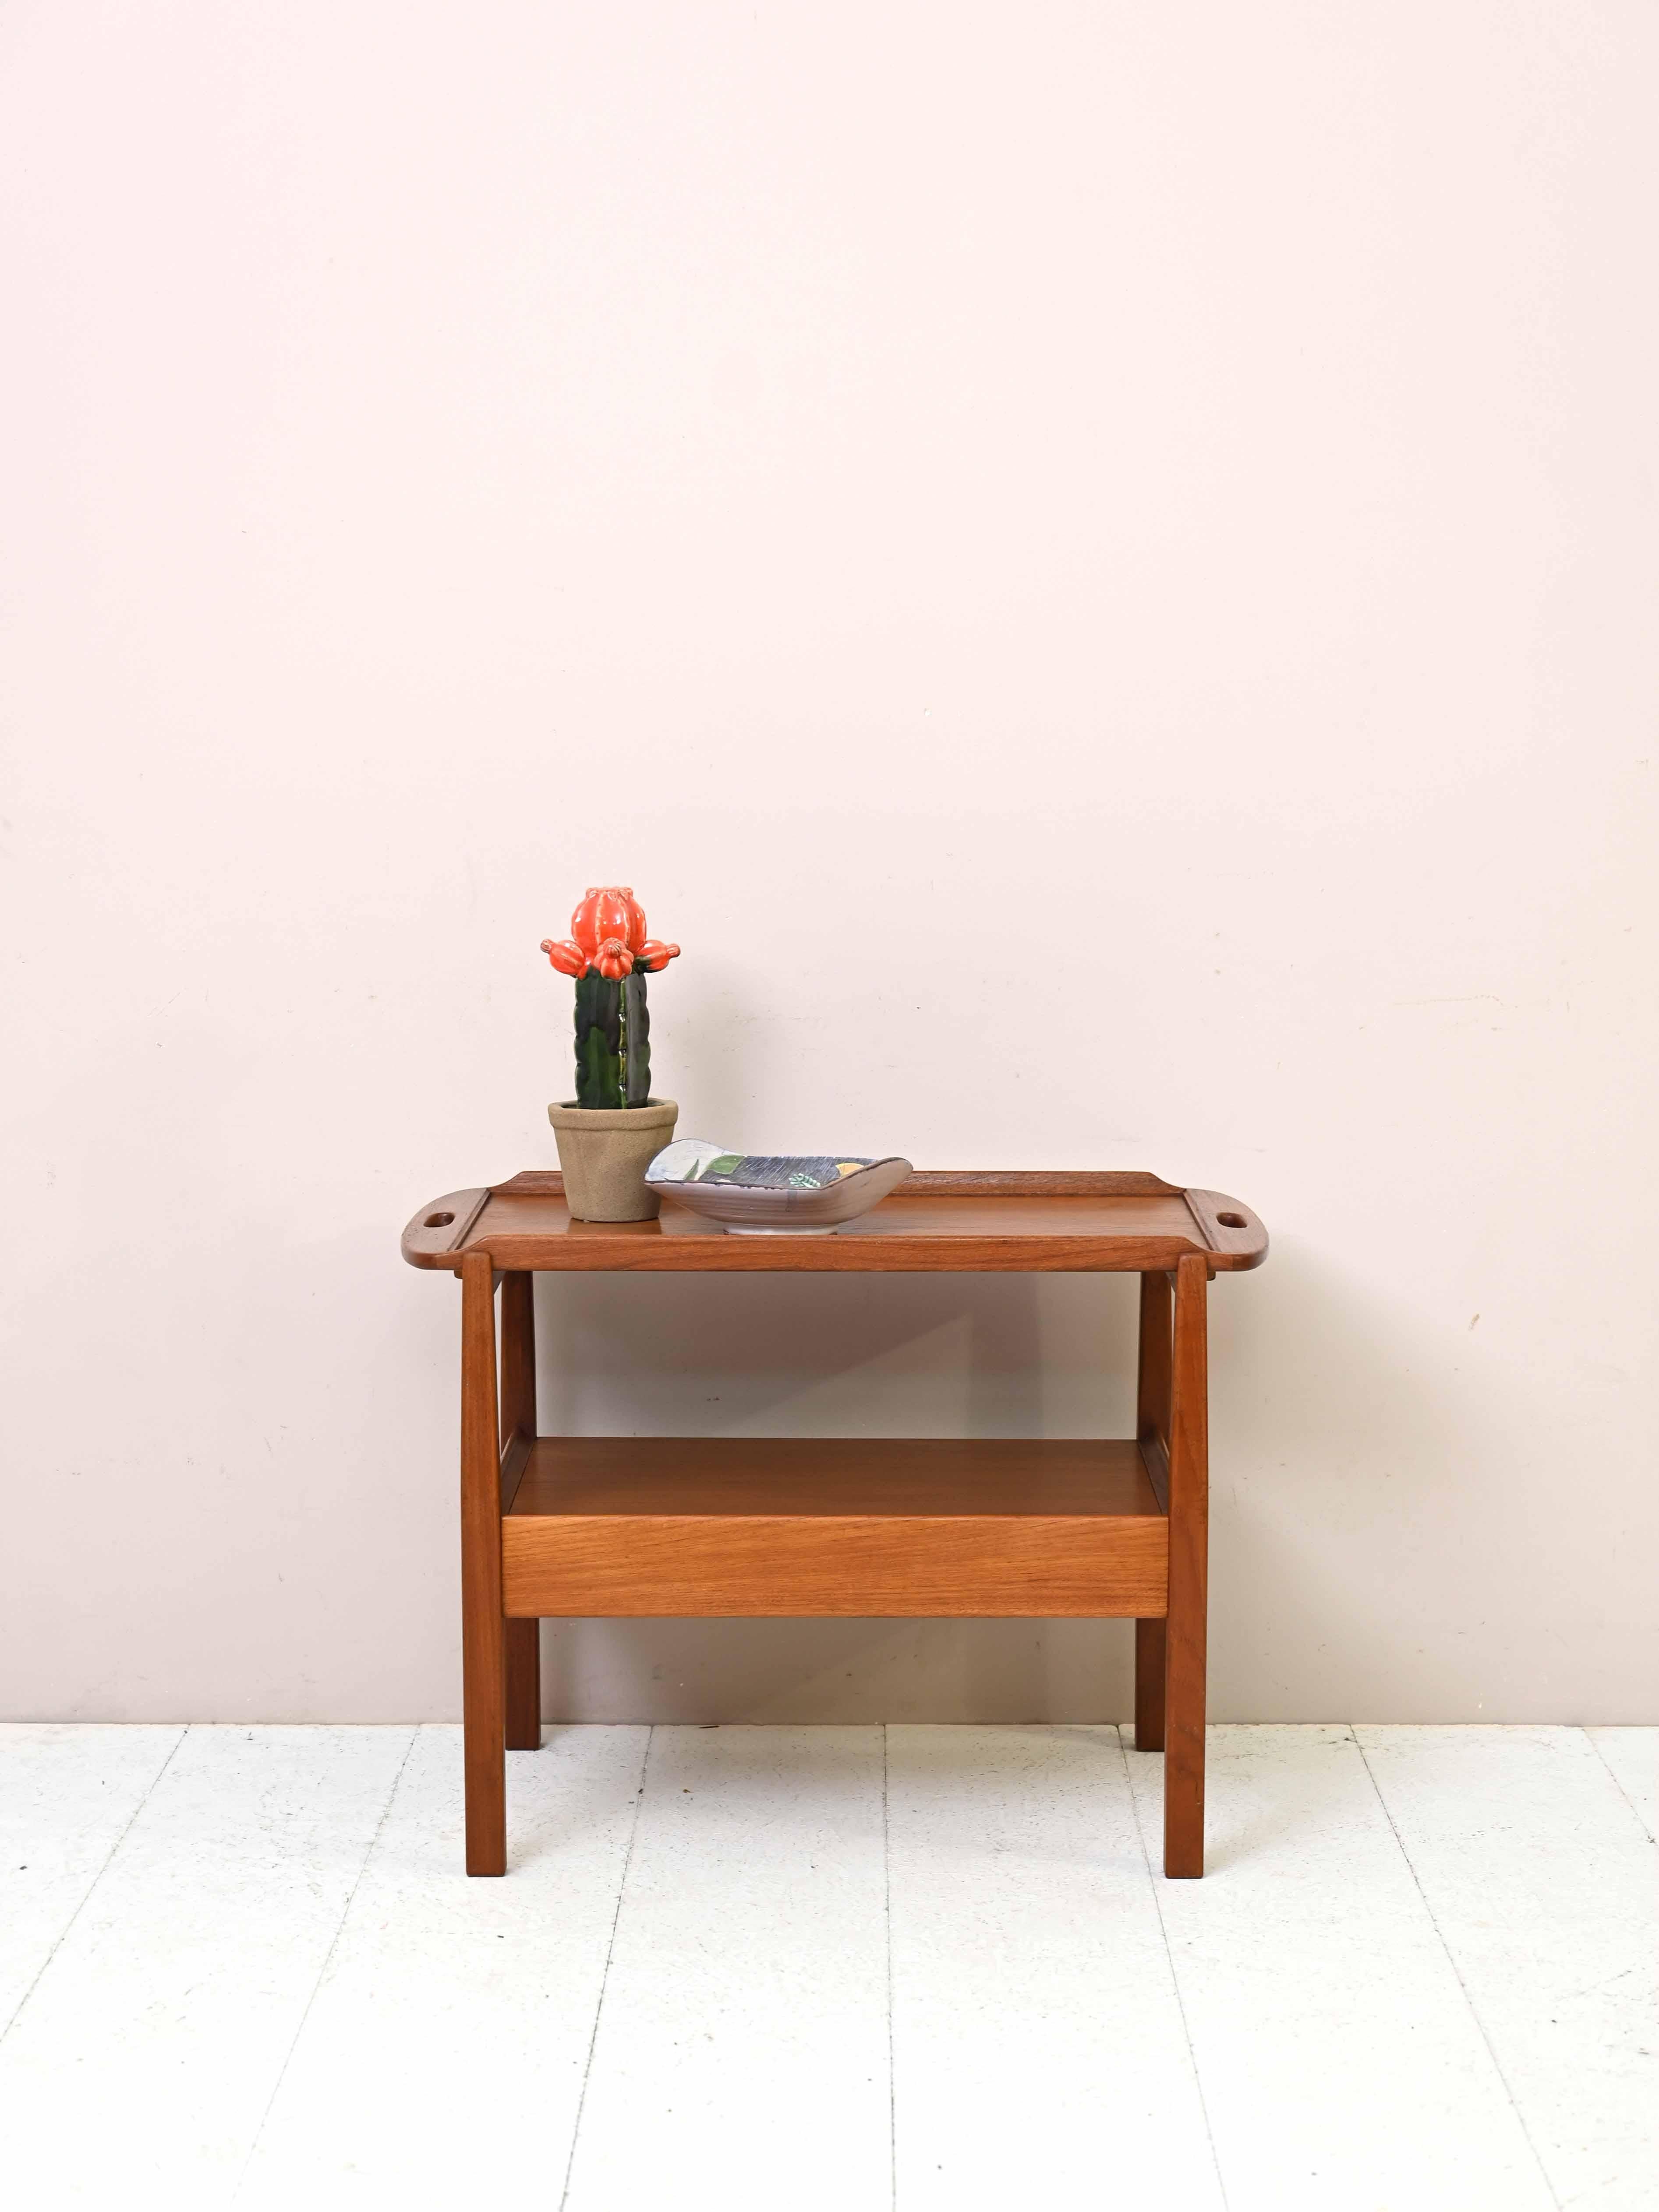 Vintage teak table with removable top.

A piece of furniture with a retro flavor that is distinguished by its distinctive tray-shaped top that can be detached from the frame.
It can be used as a side table, sofa table or as an additional support